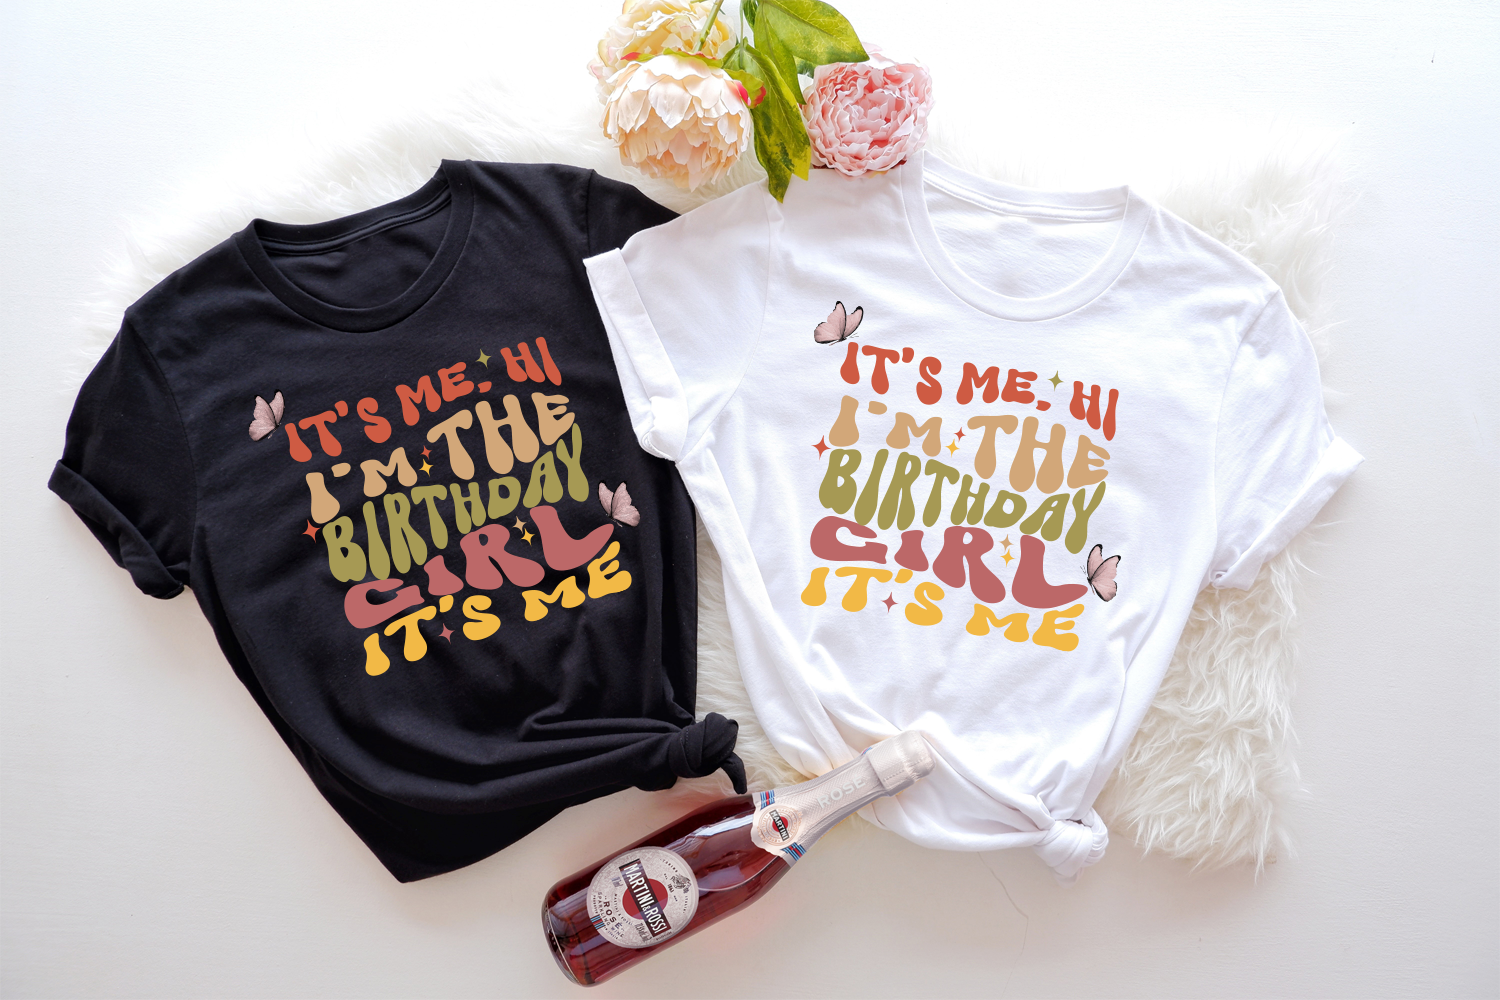 Mark your birthday with this unique and eye-catching "Birthday Girl" shirt for women and girls.